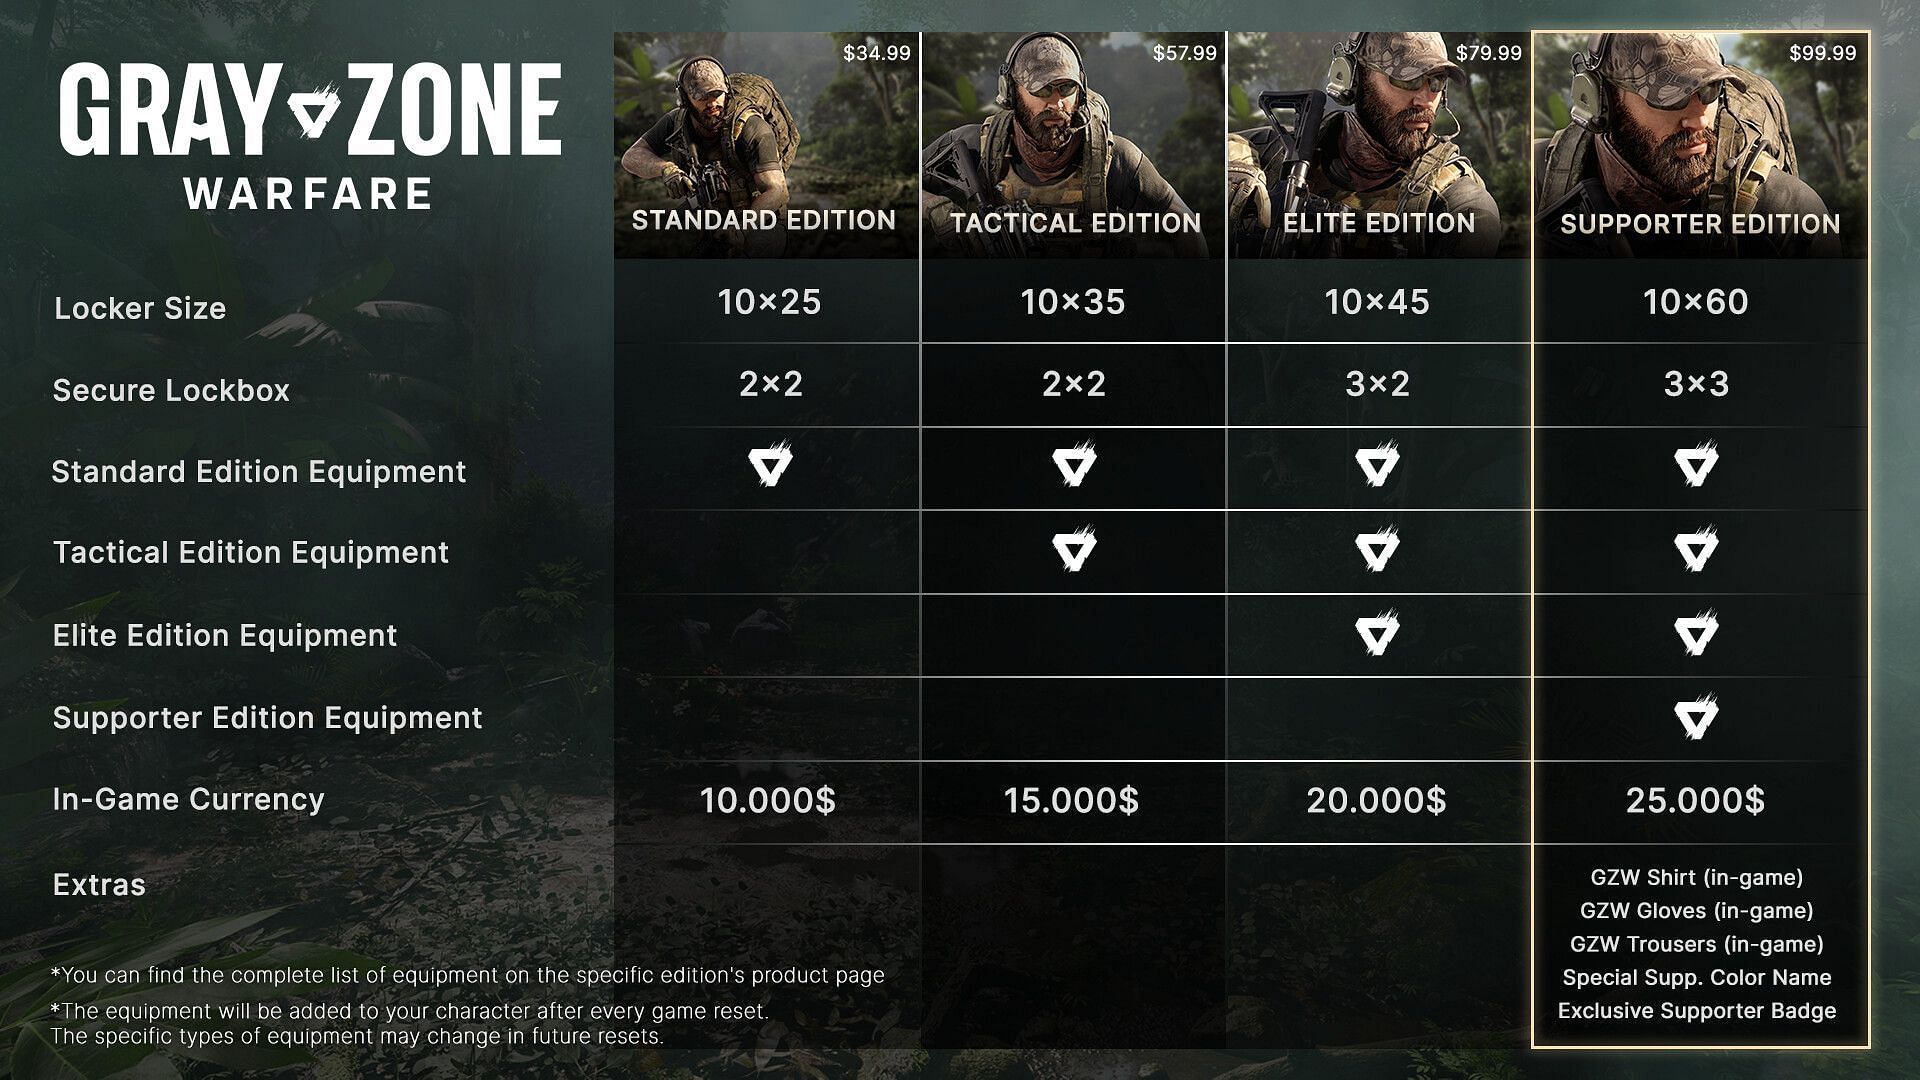 All special items for each edition (Image via Madfinger Games)